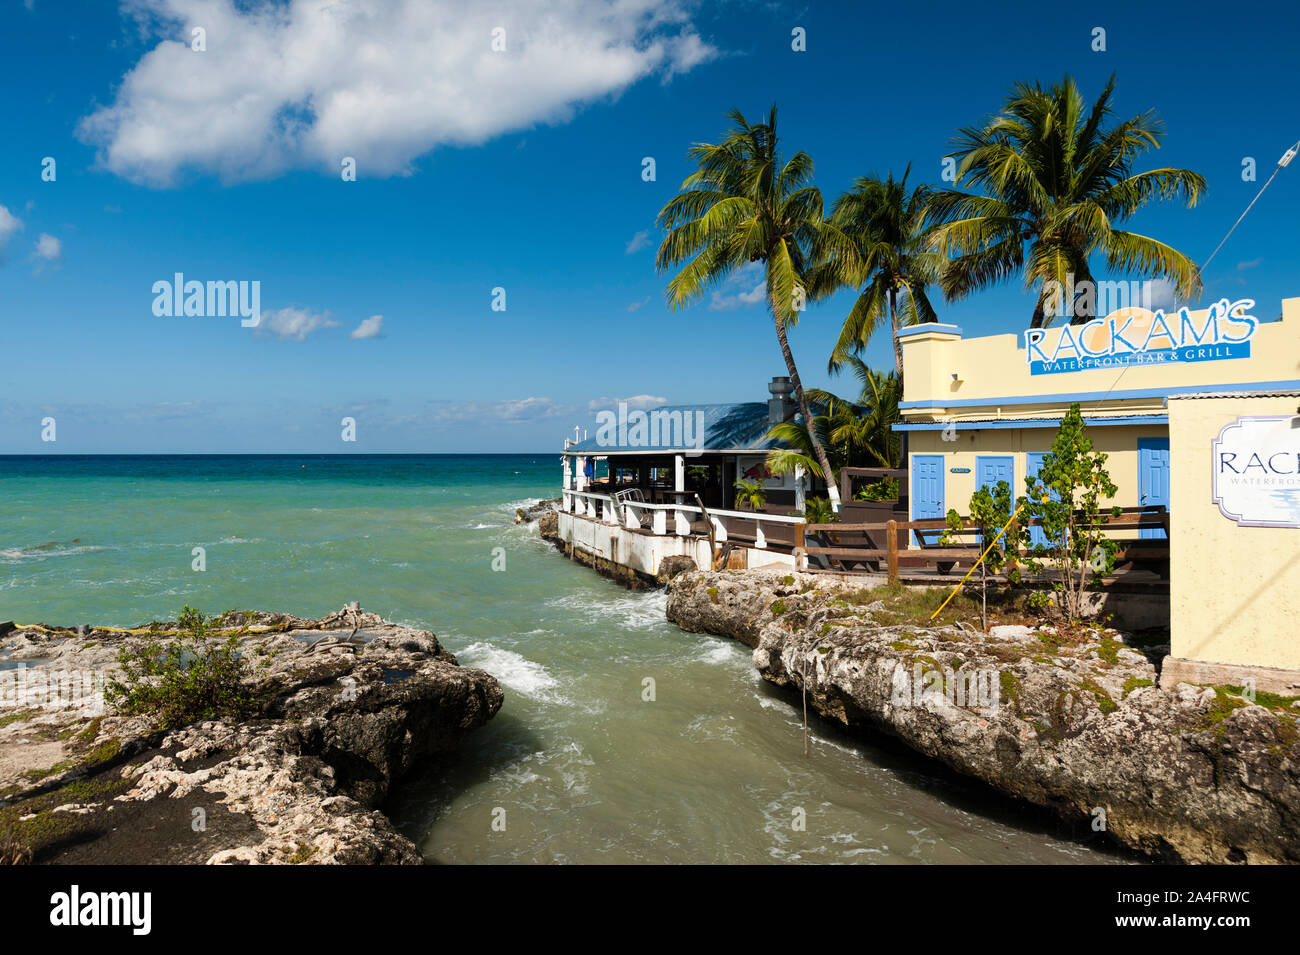 George Town, Grand Cayman, Cayman Islands Banque D'Images